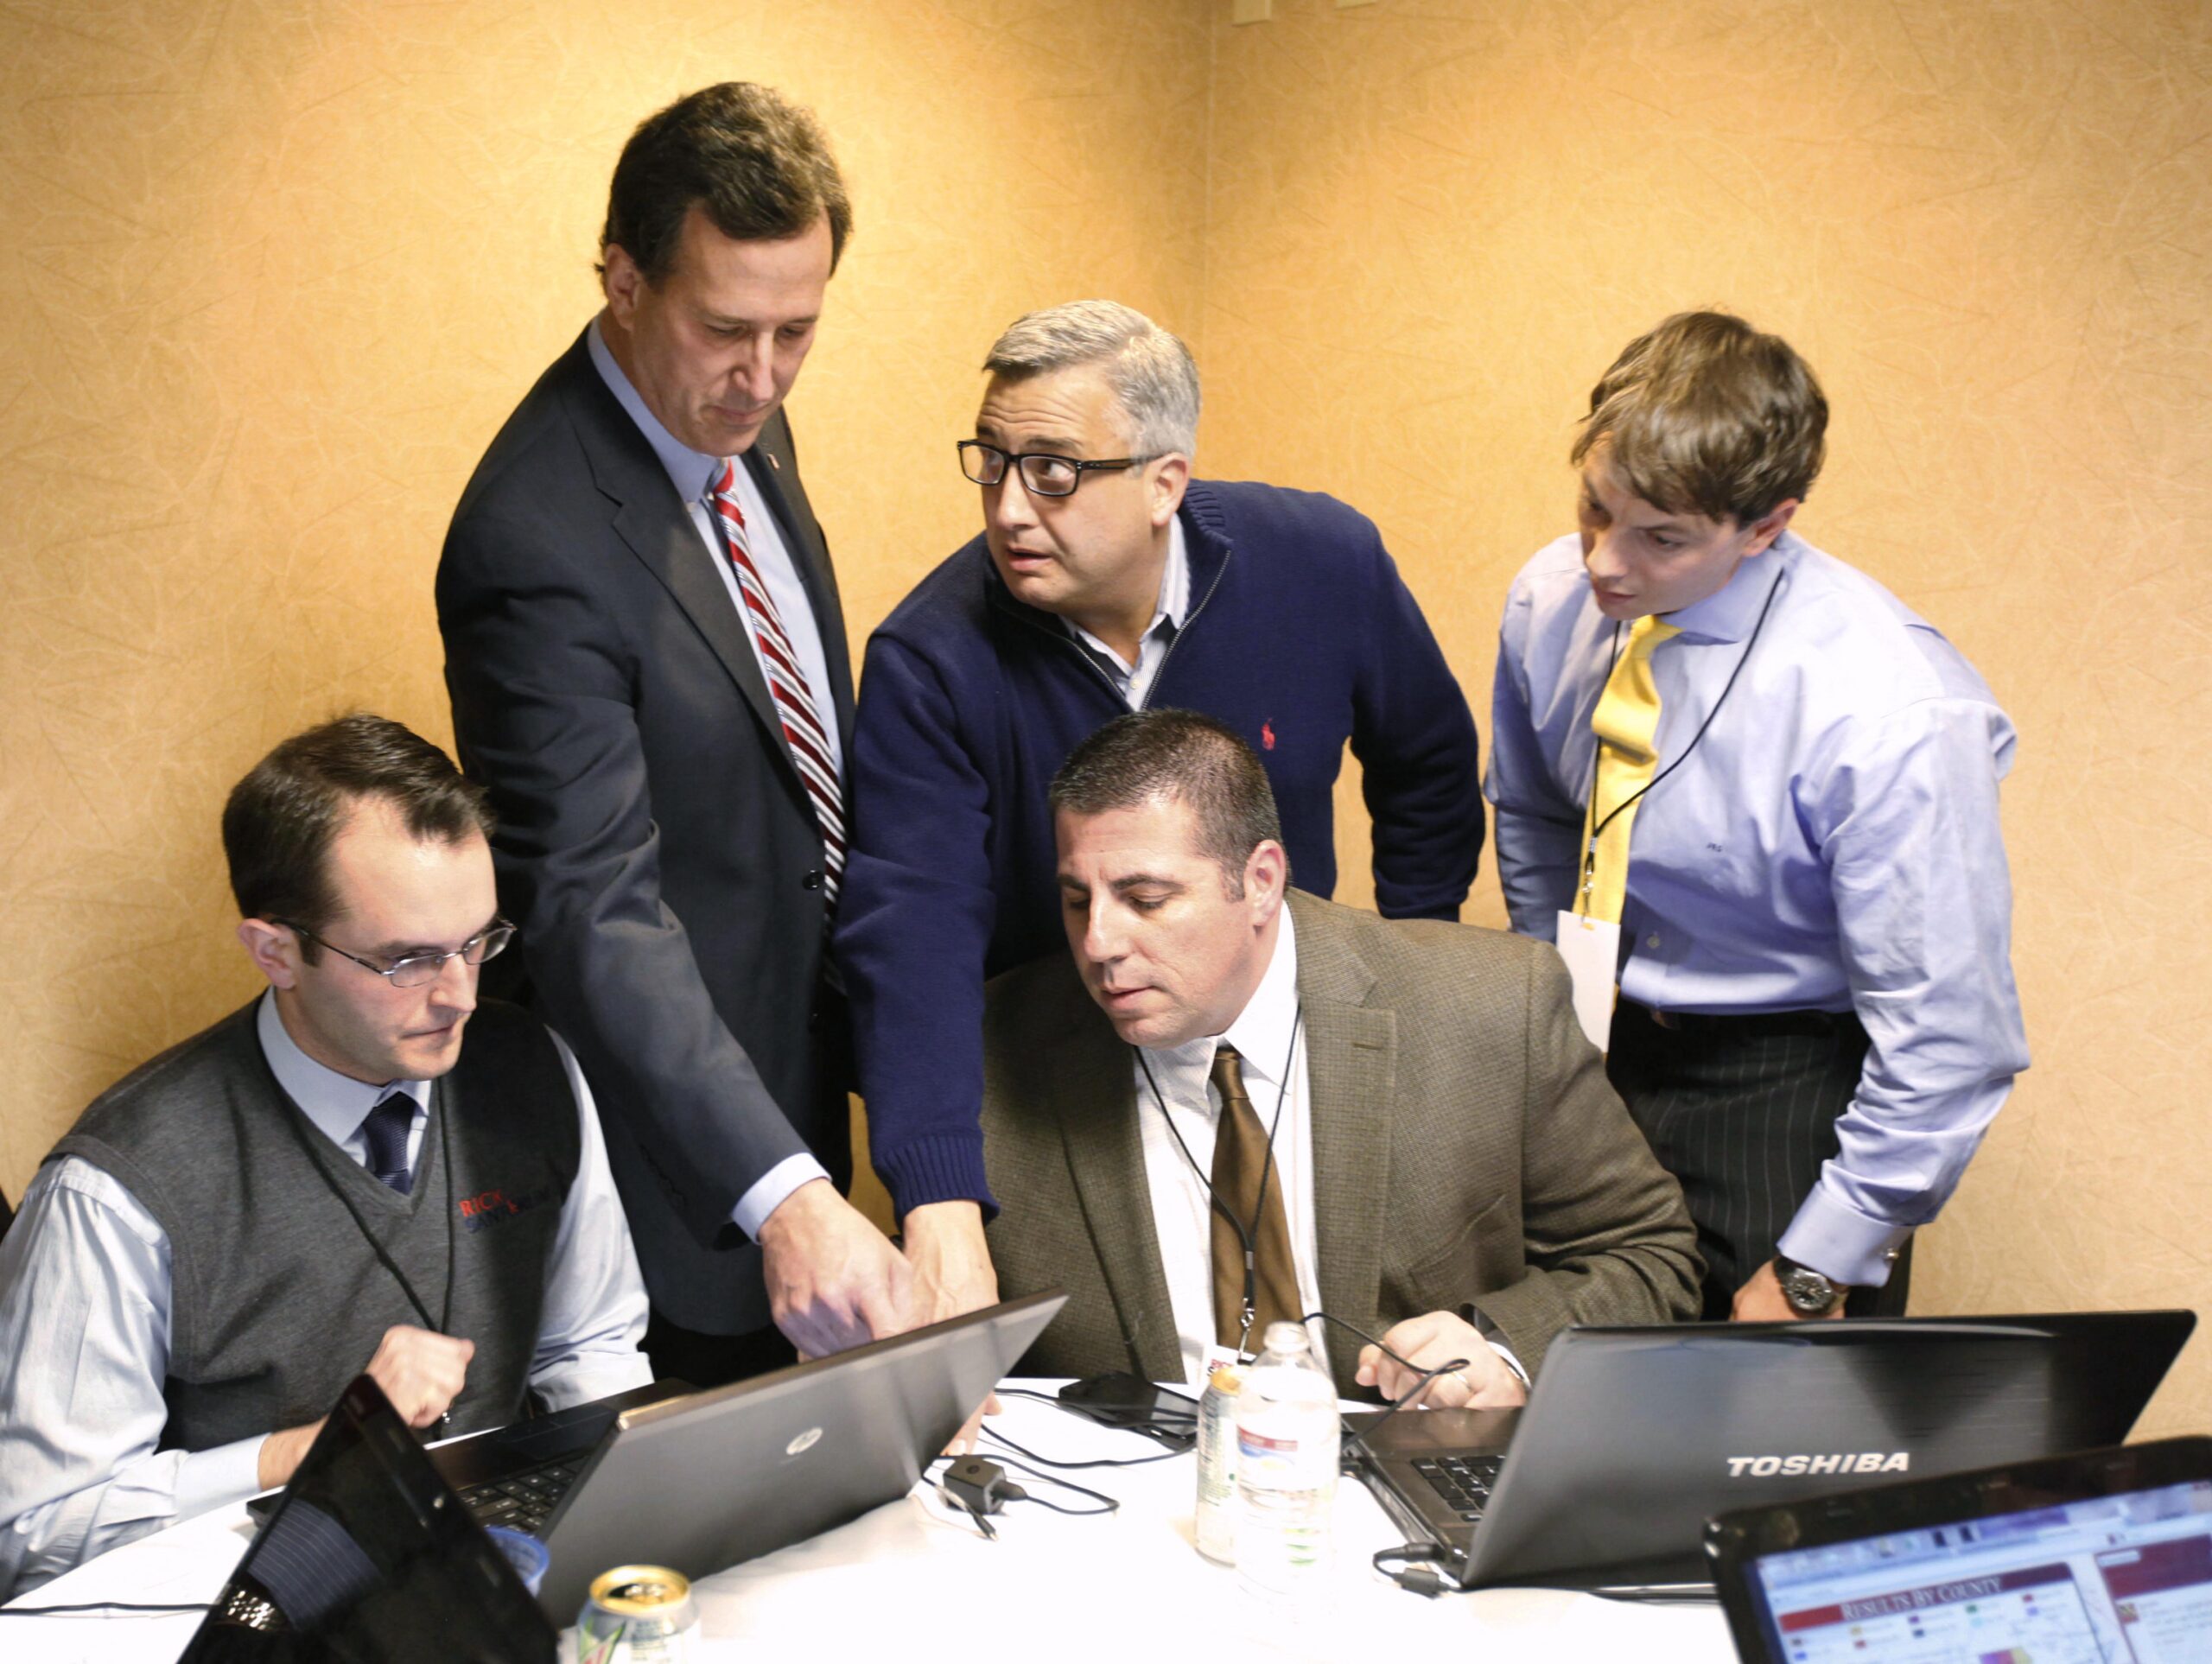 Rick Santorum (top left) looks over Iowa Republican presidential caucus returns with his campaign staff in 2012. Santorum entered the final week so far behind Romney that he was in sixth place in the RealClearPolitics polling average.